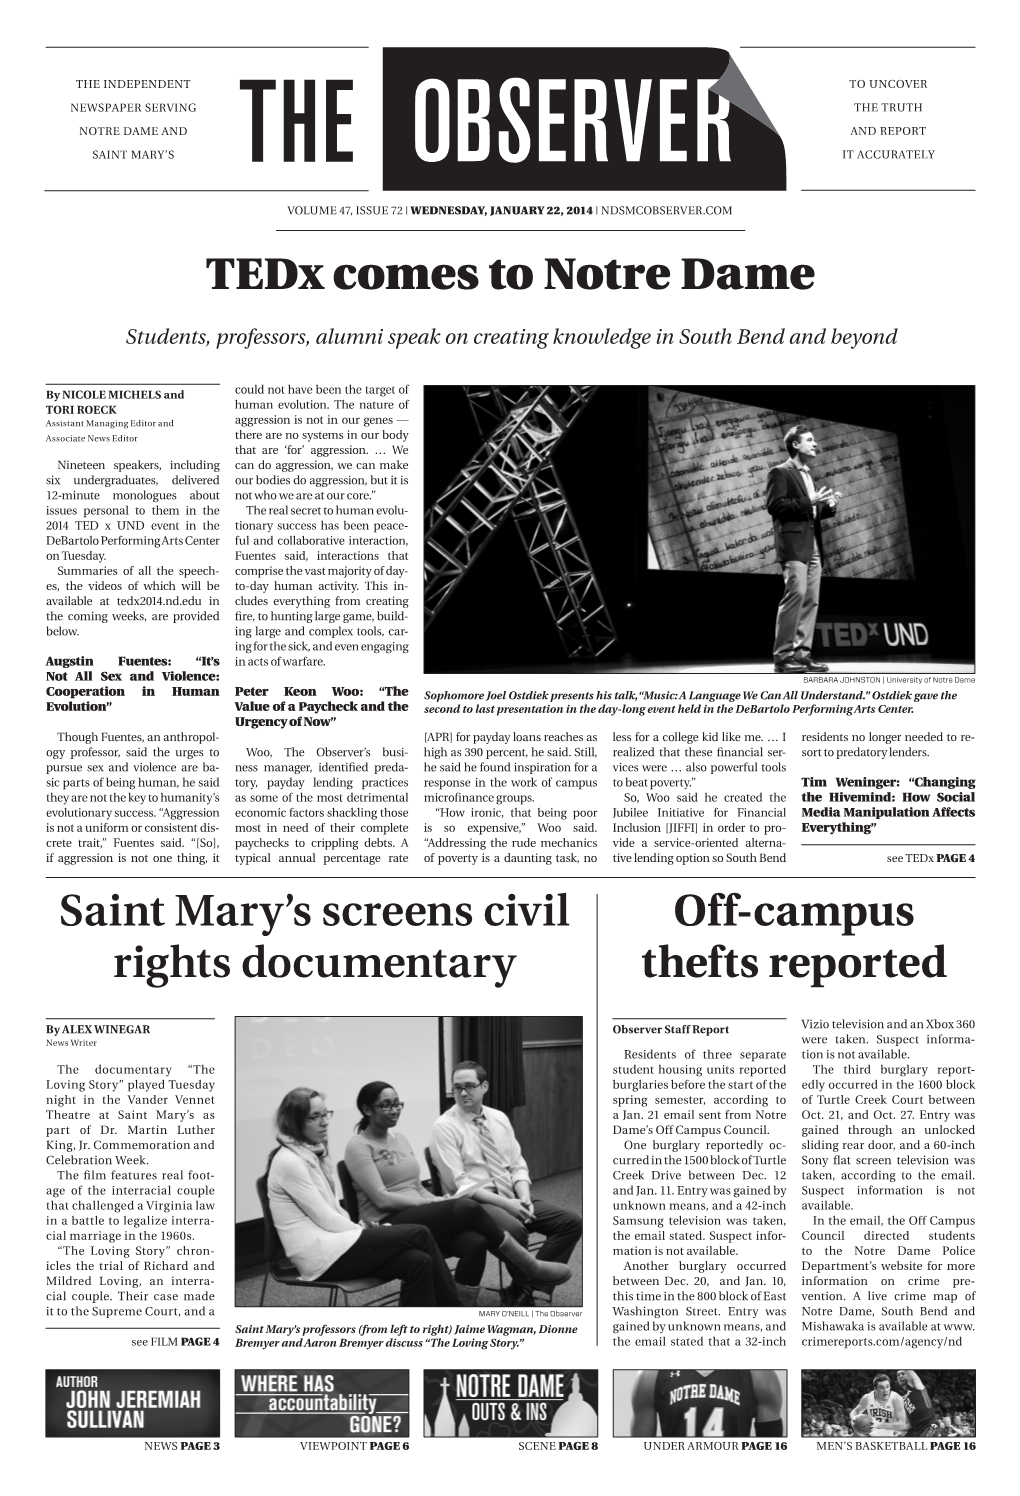 Tedx Comes to Notre Dame Saint Mary's Screens Civil Rights